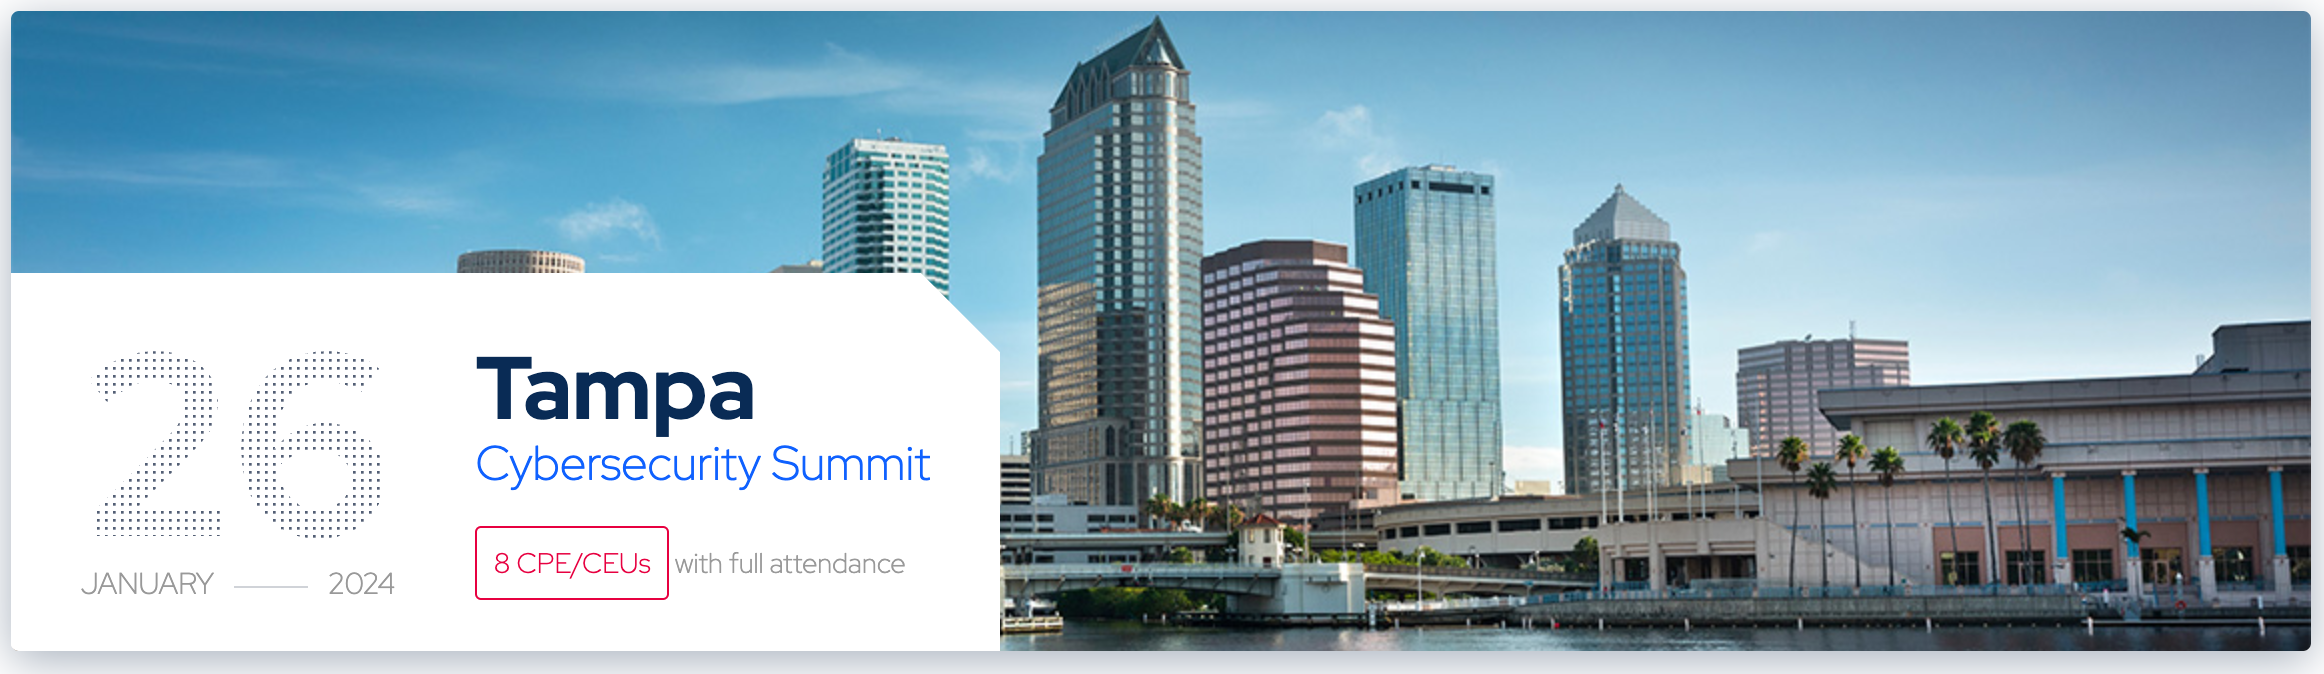 Cyber Security Summit Tampa 2024 AI Enabled Security Automation